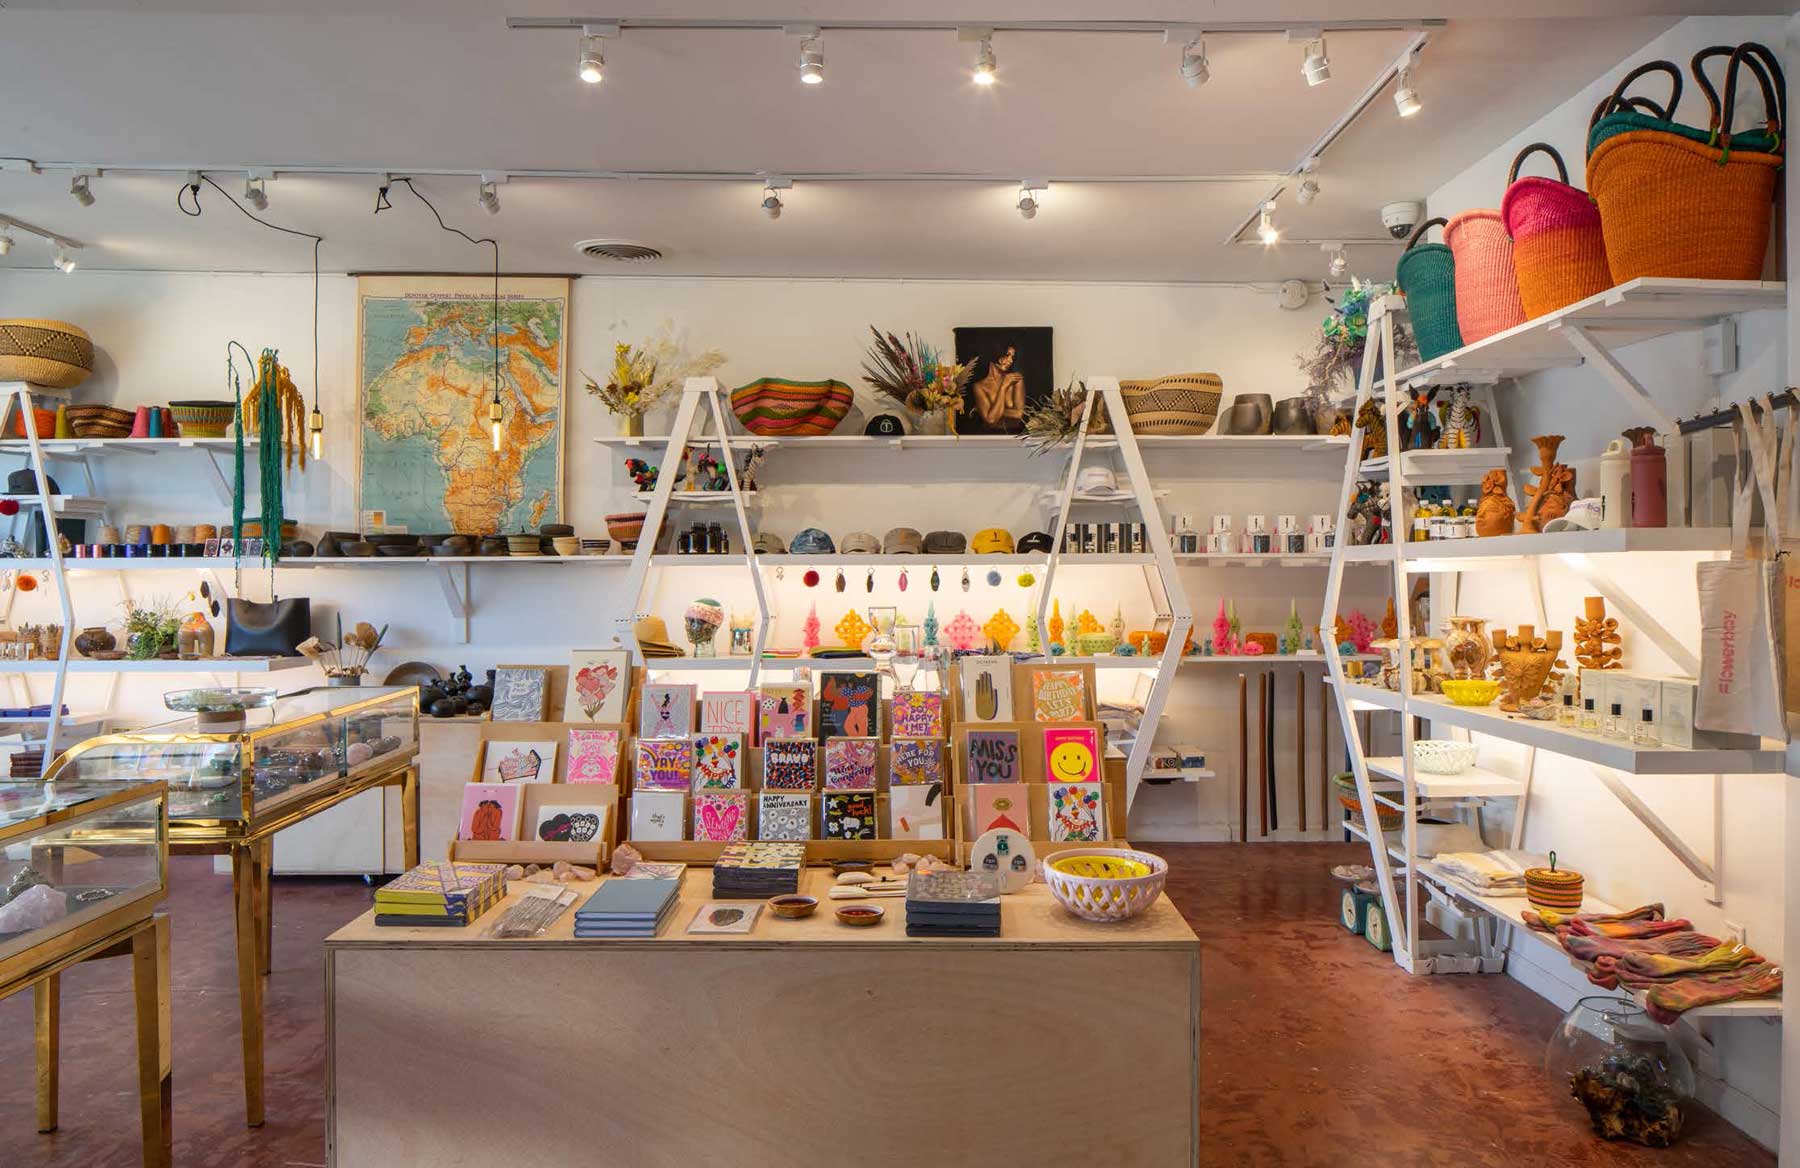 Interior of Flowerboy Project store in Venice, California